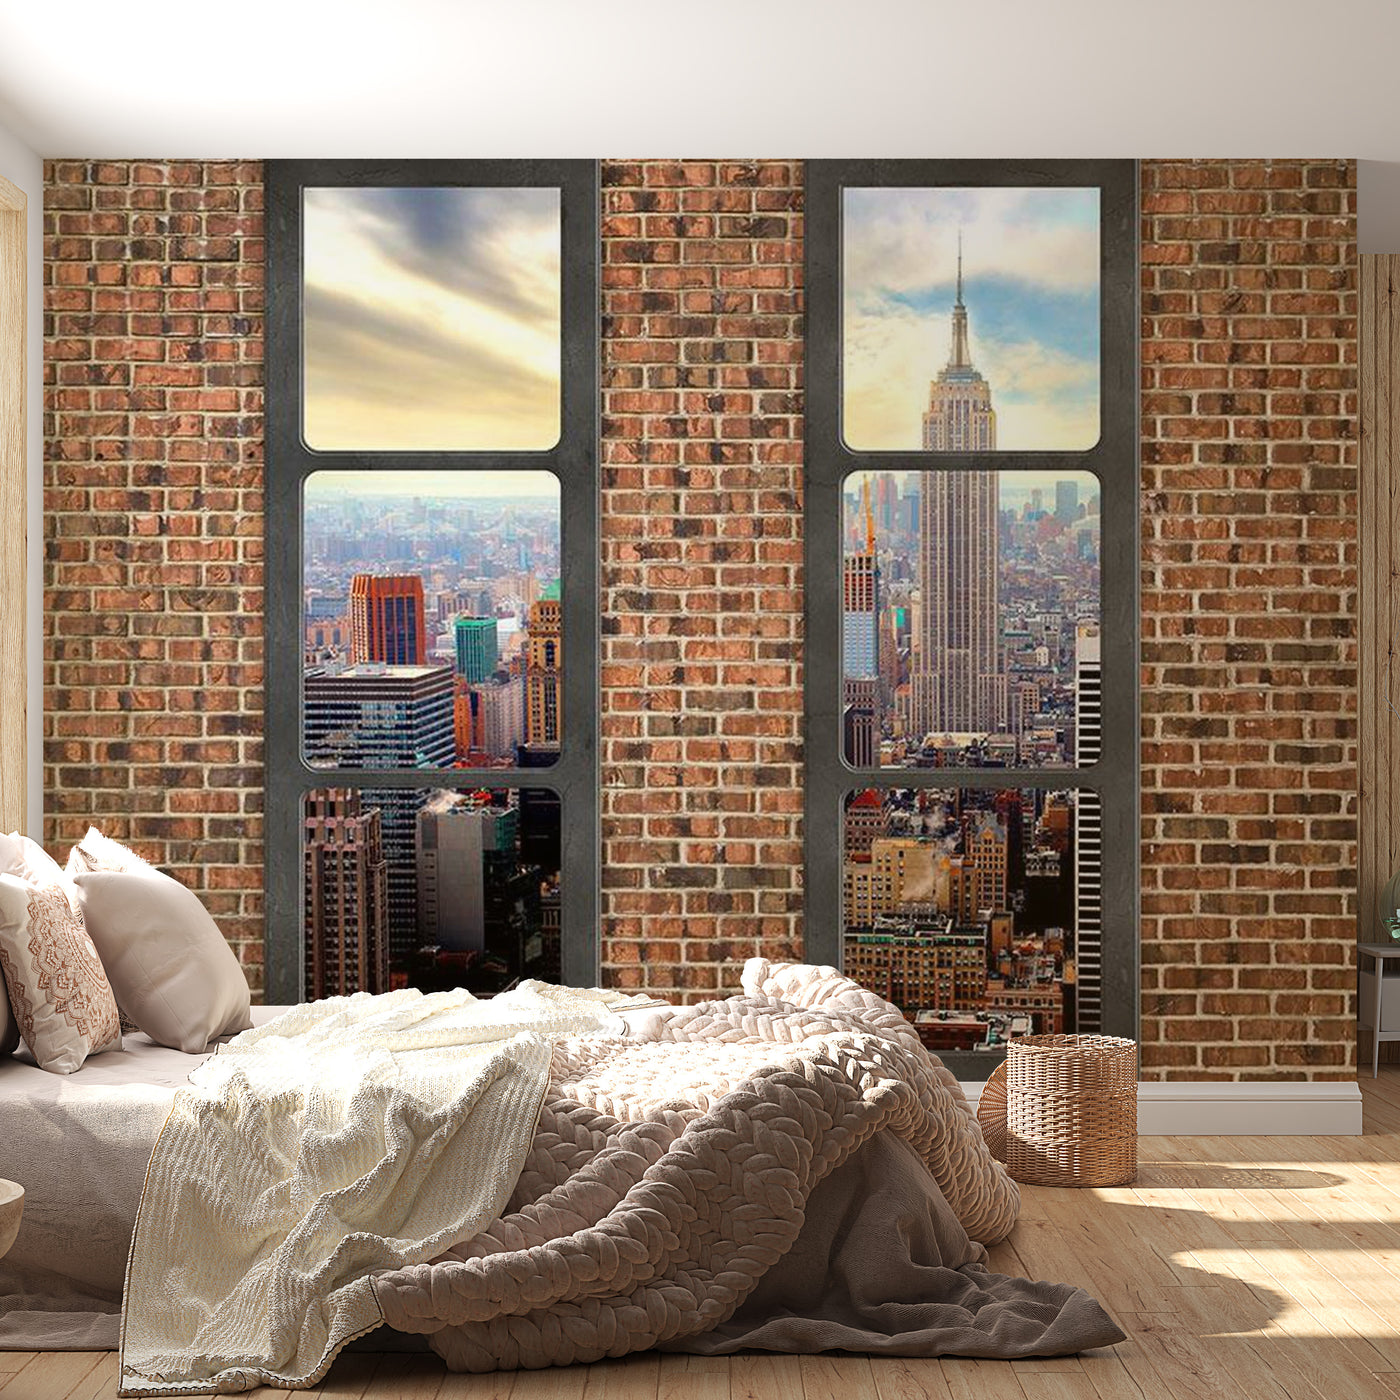 Peel & Stick Wall Mural - The View From The Window: New York - Removable Wall Decals